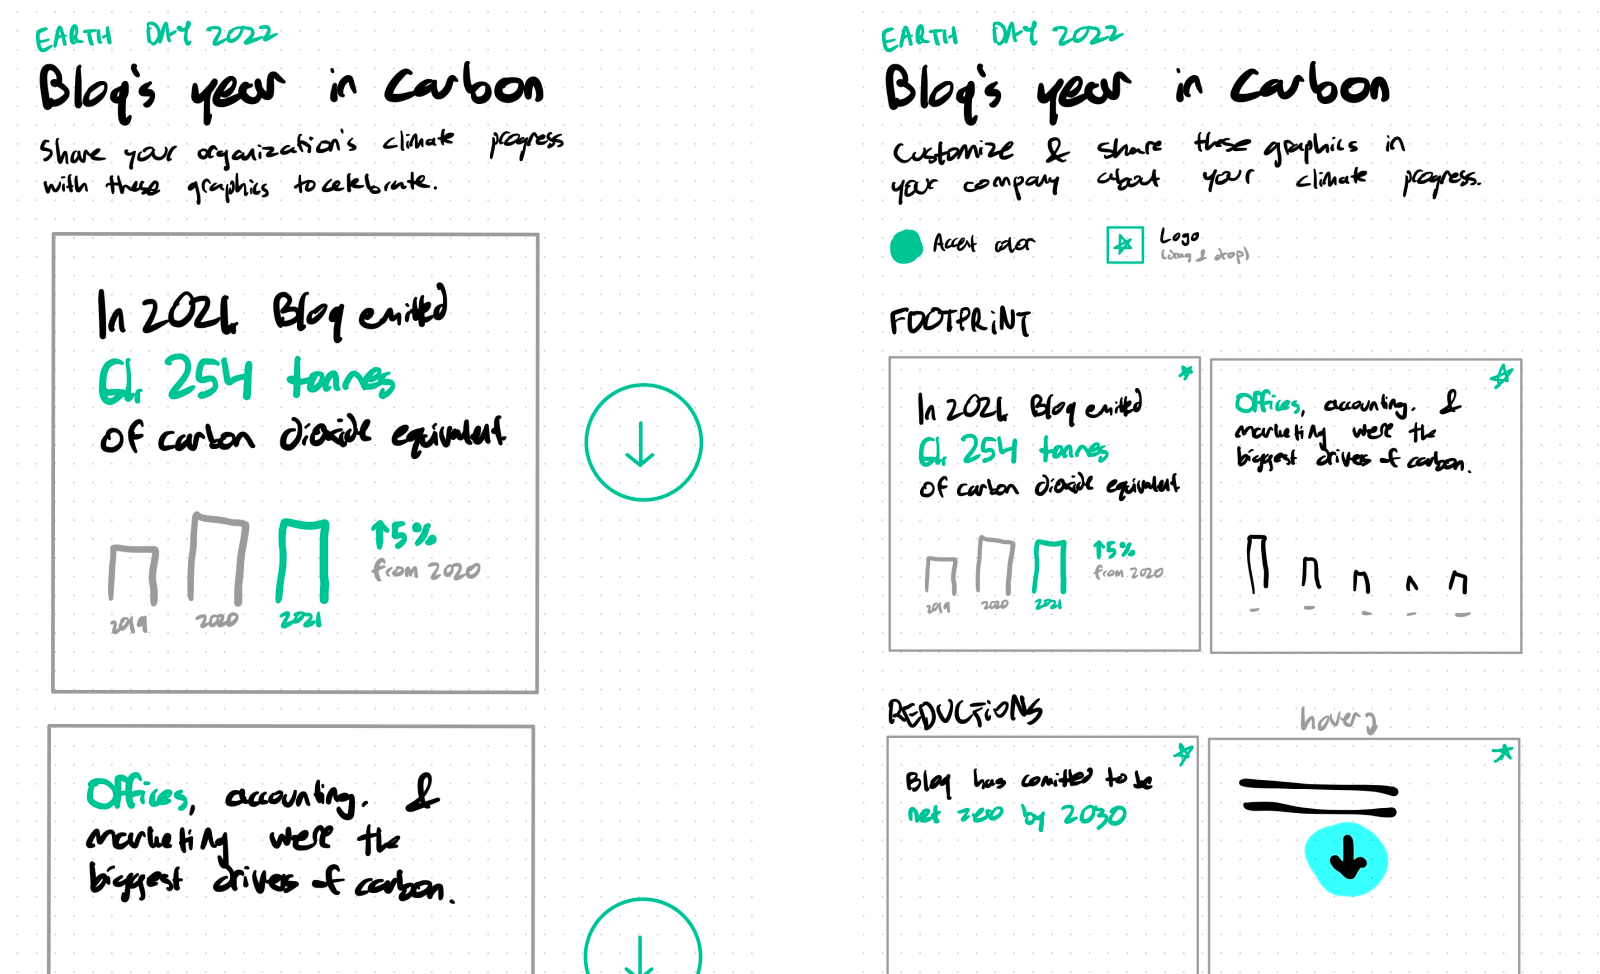 Two pages side-by-side with handwritten sketches of “Bloq's year in carbon” with downloadable graphics